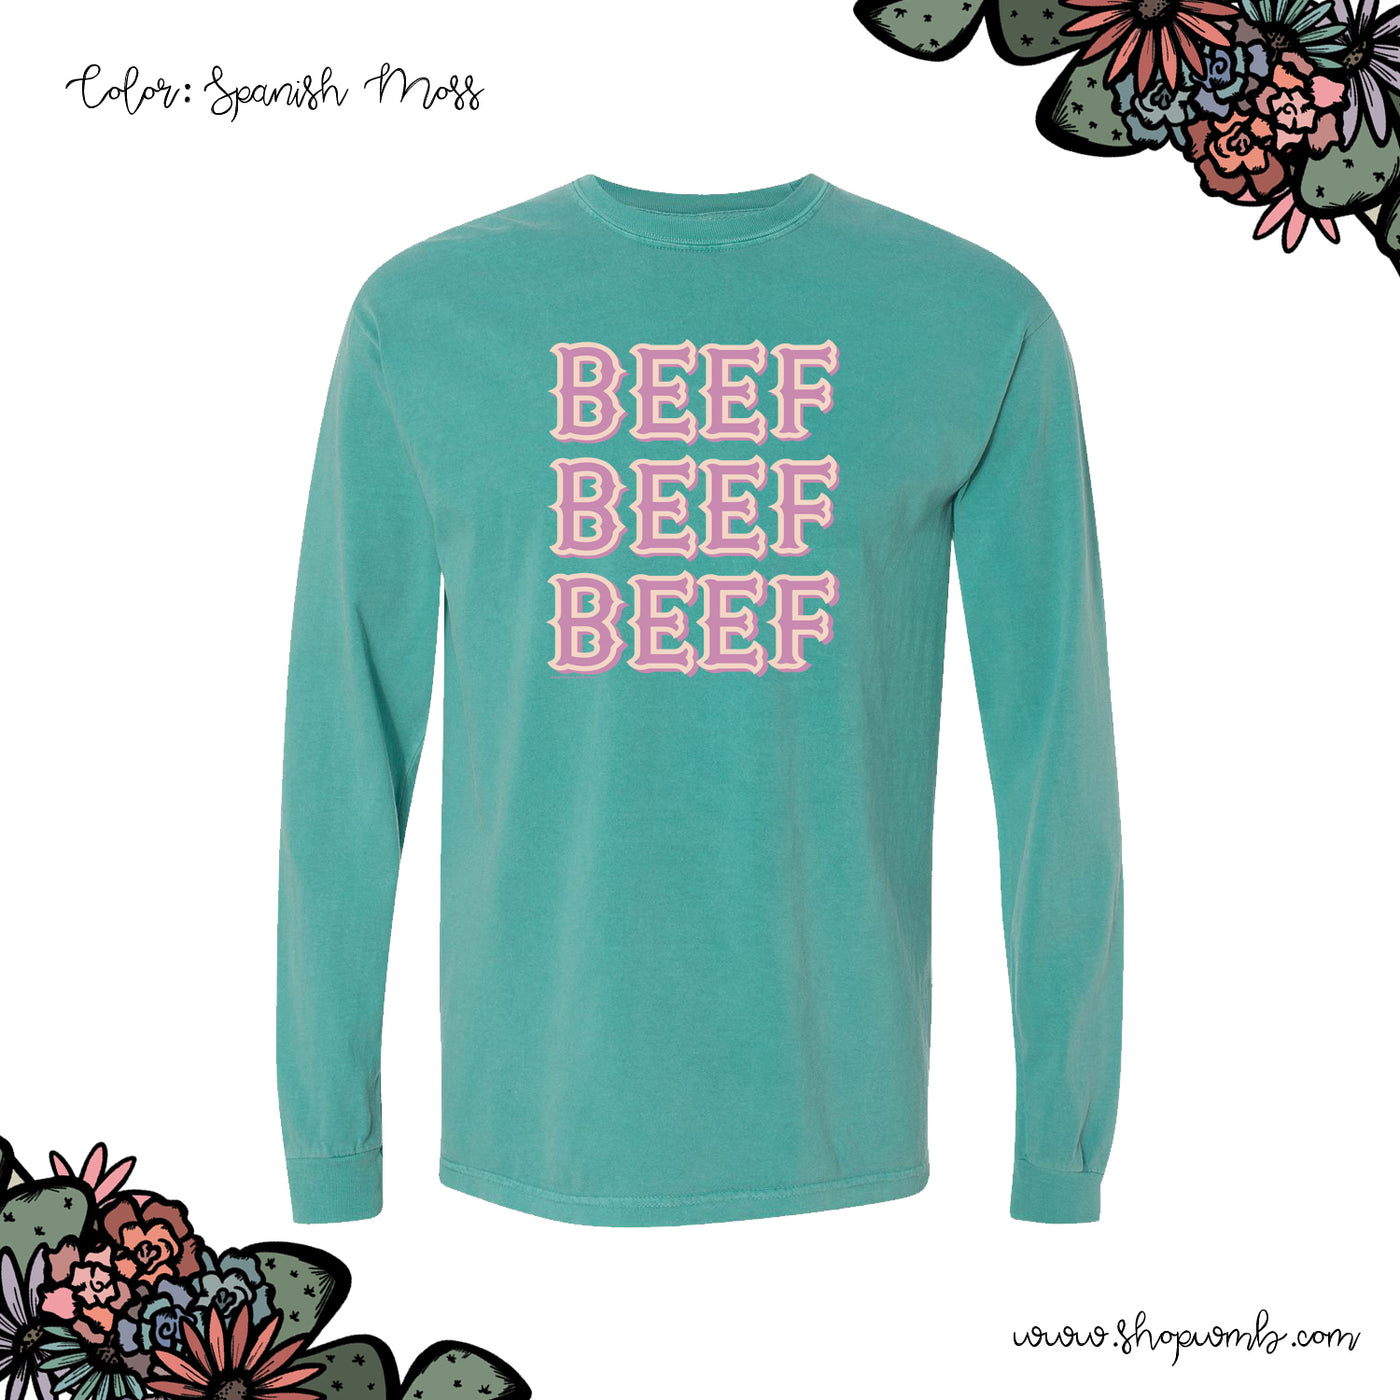 Western Beef LONG SLEEVE T-Shirt (S-3XL) - Multiple Colors!